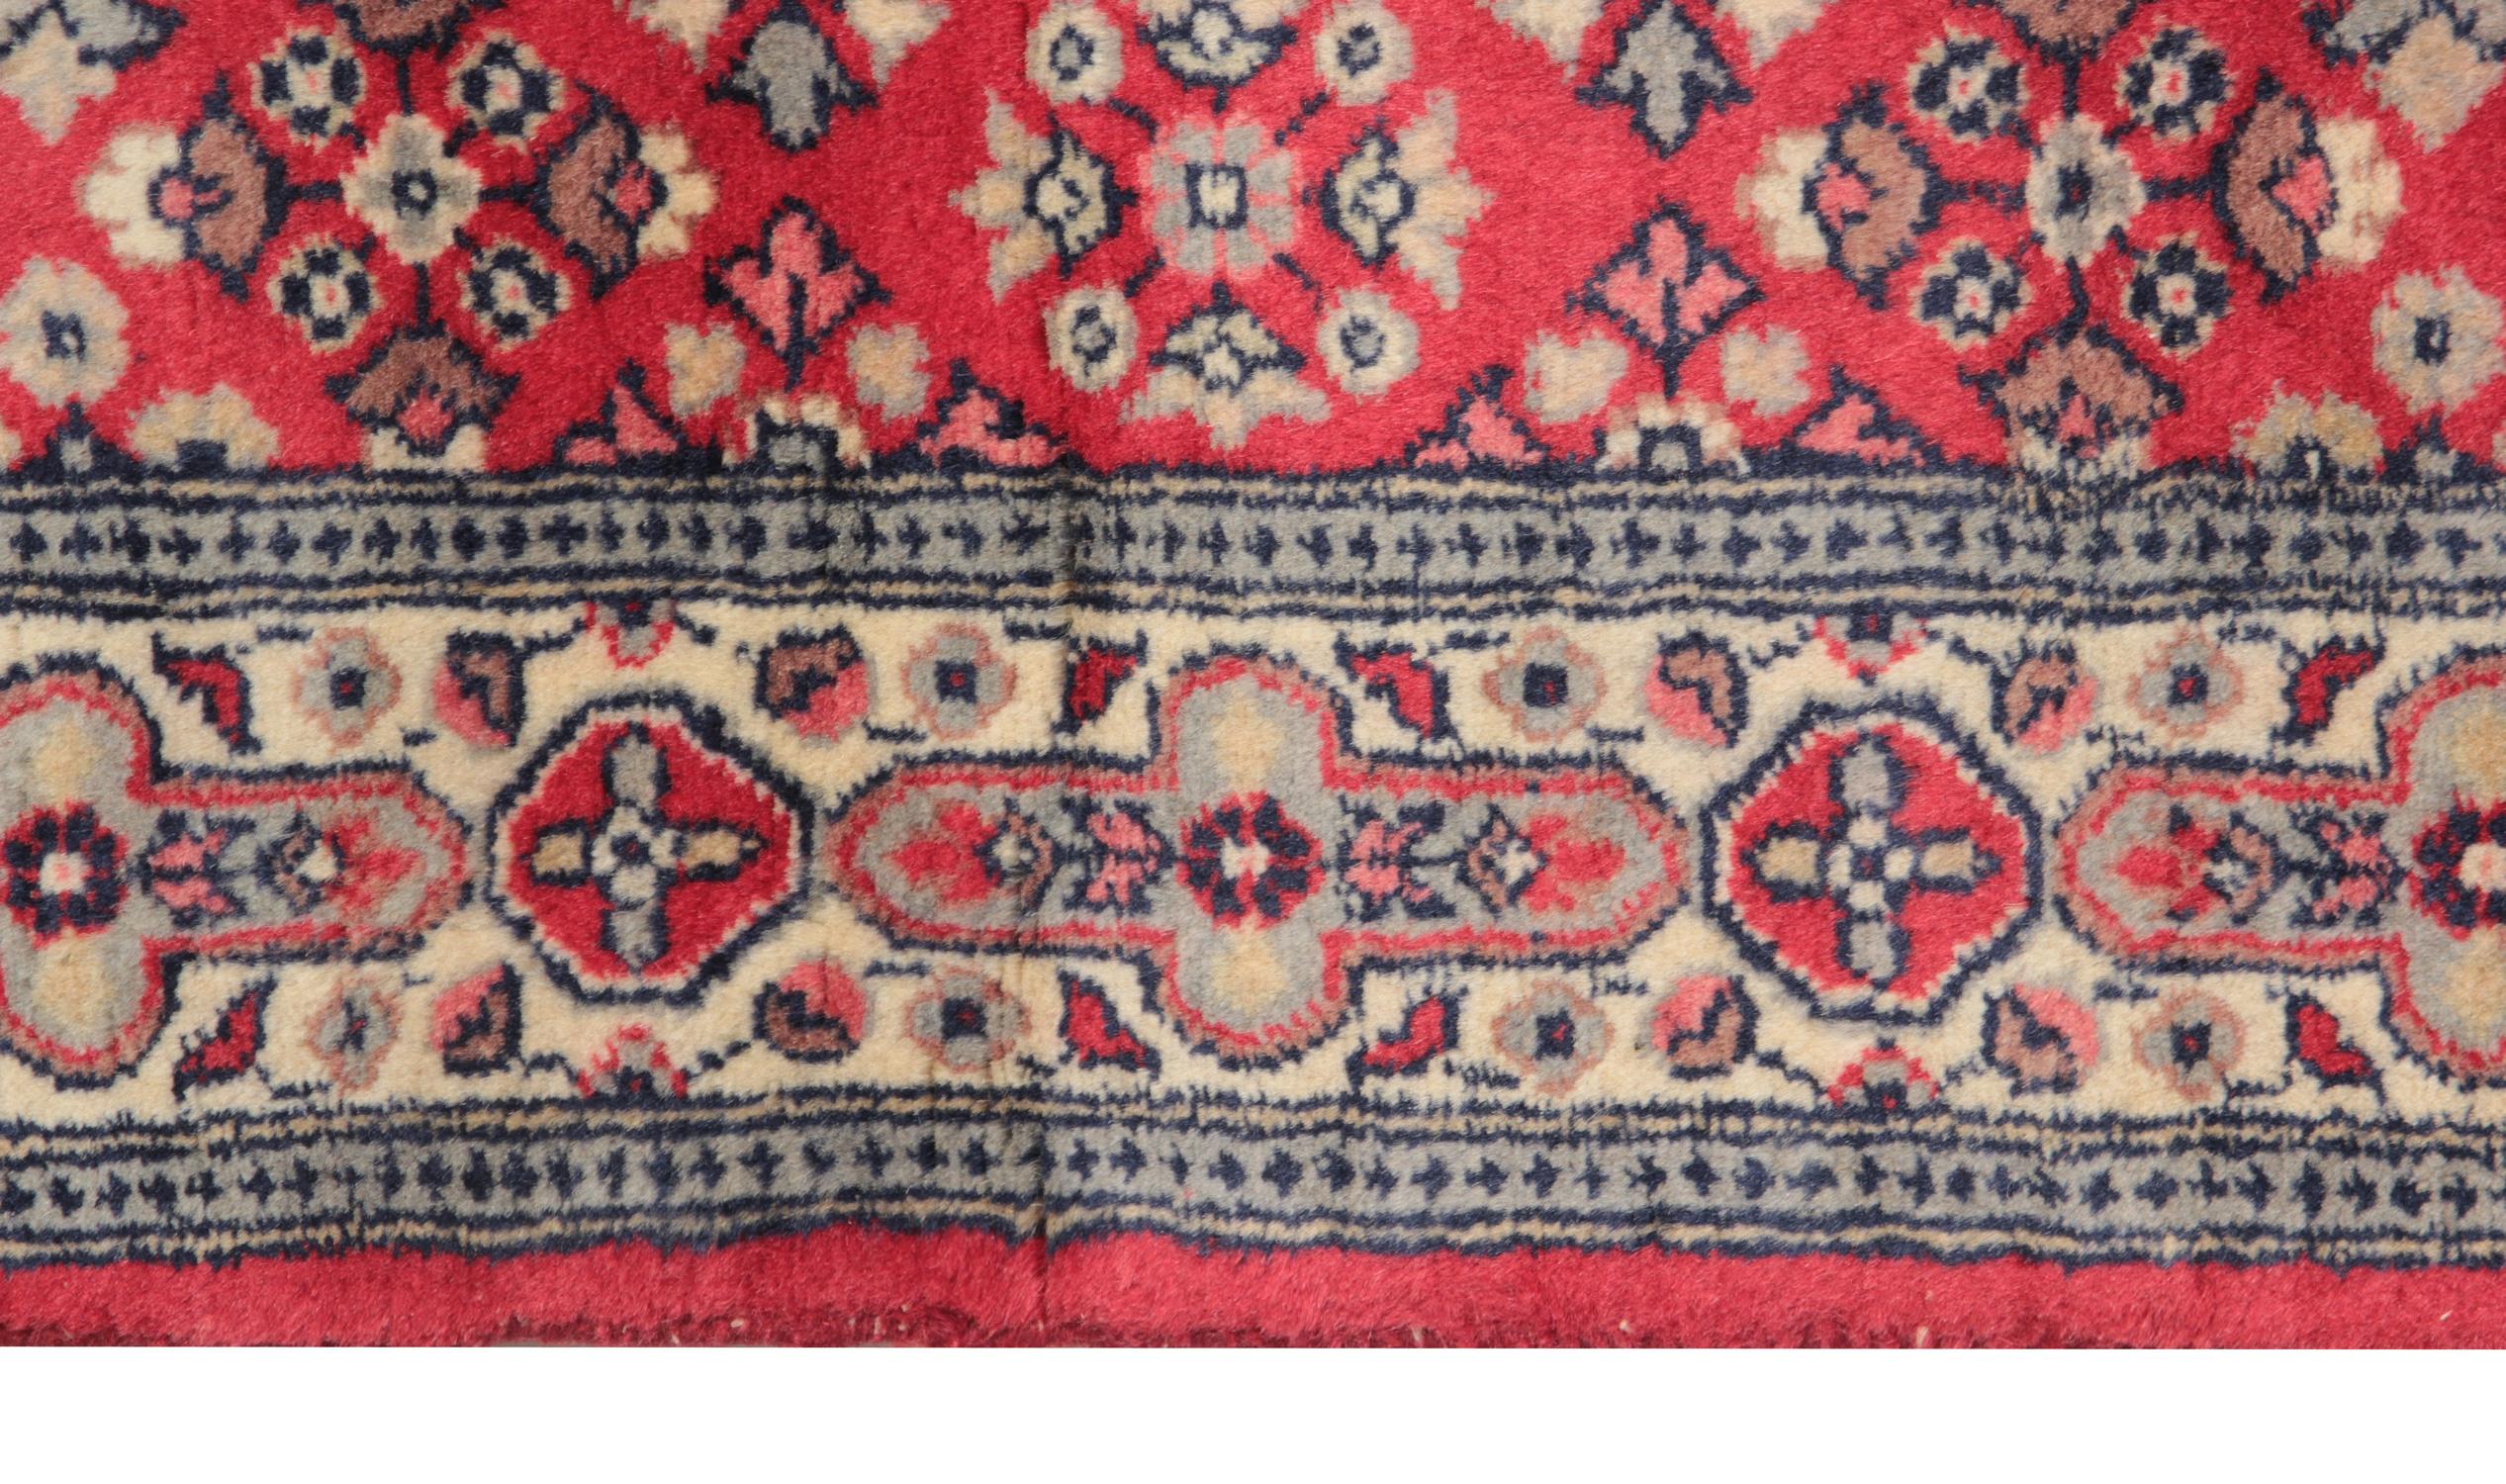 This handwoven Indian rugs is a tribal style carpet rug made on our looms by our master weavers in India. These handmade rugs have been made with all-natural veg dyes and hand-spun wool. The large scale design makes Sultanabad wool rugs regarded as